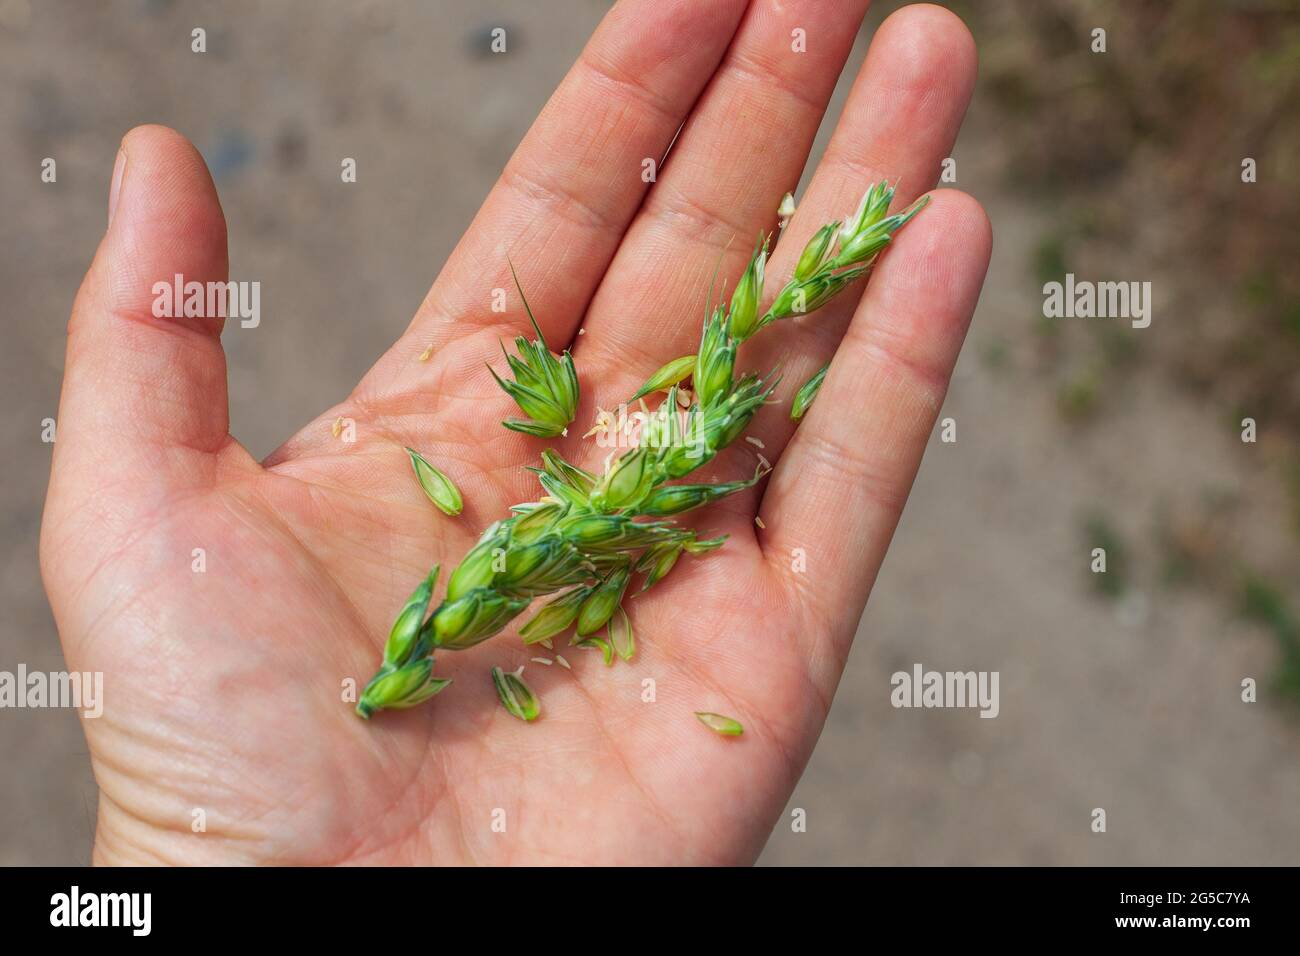 Green darnel on a male palm outdoors Stock Photo